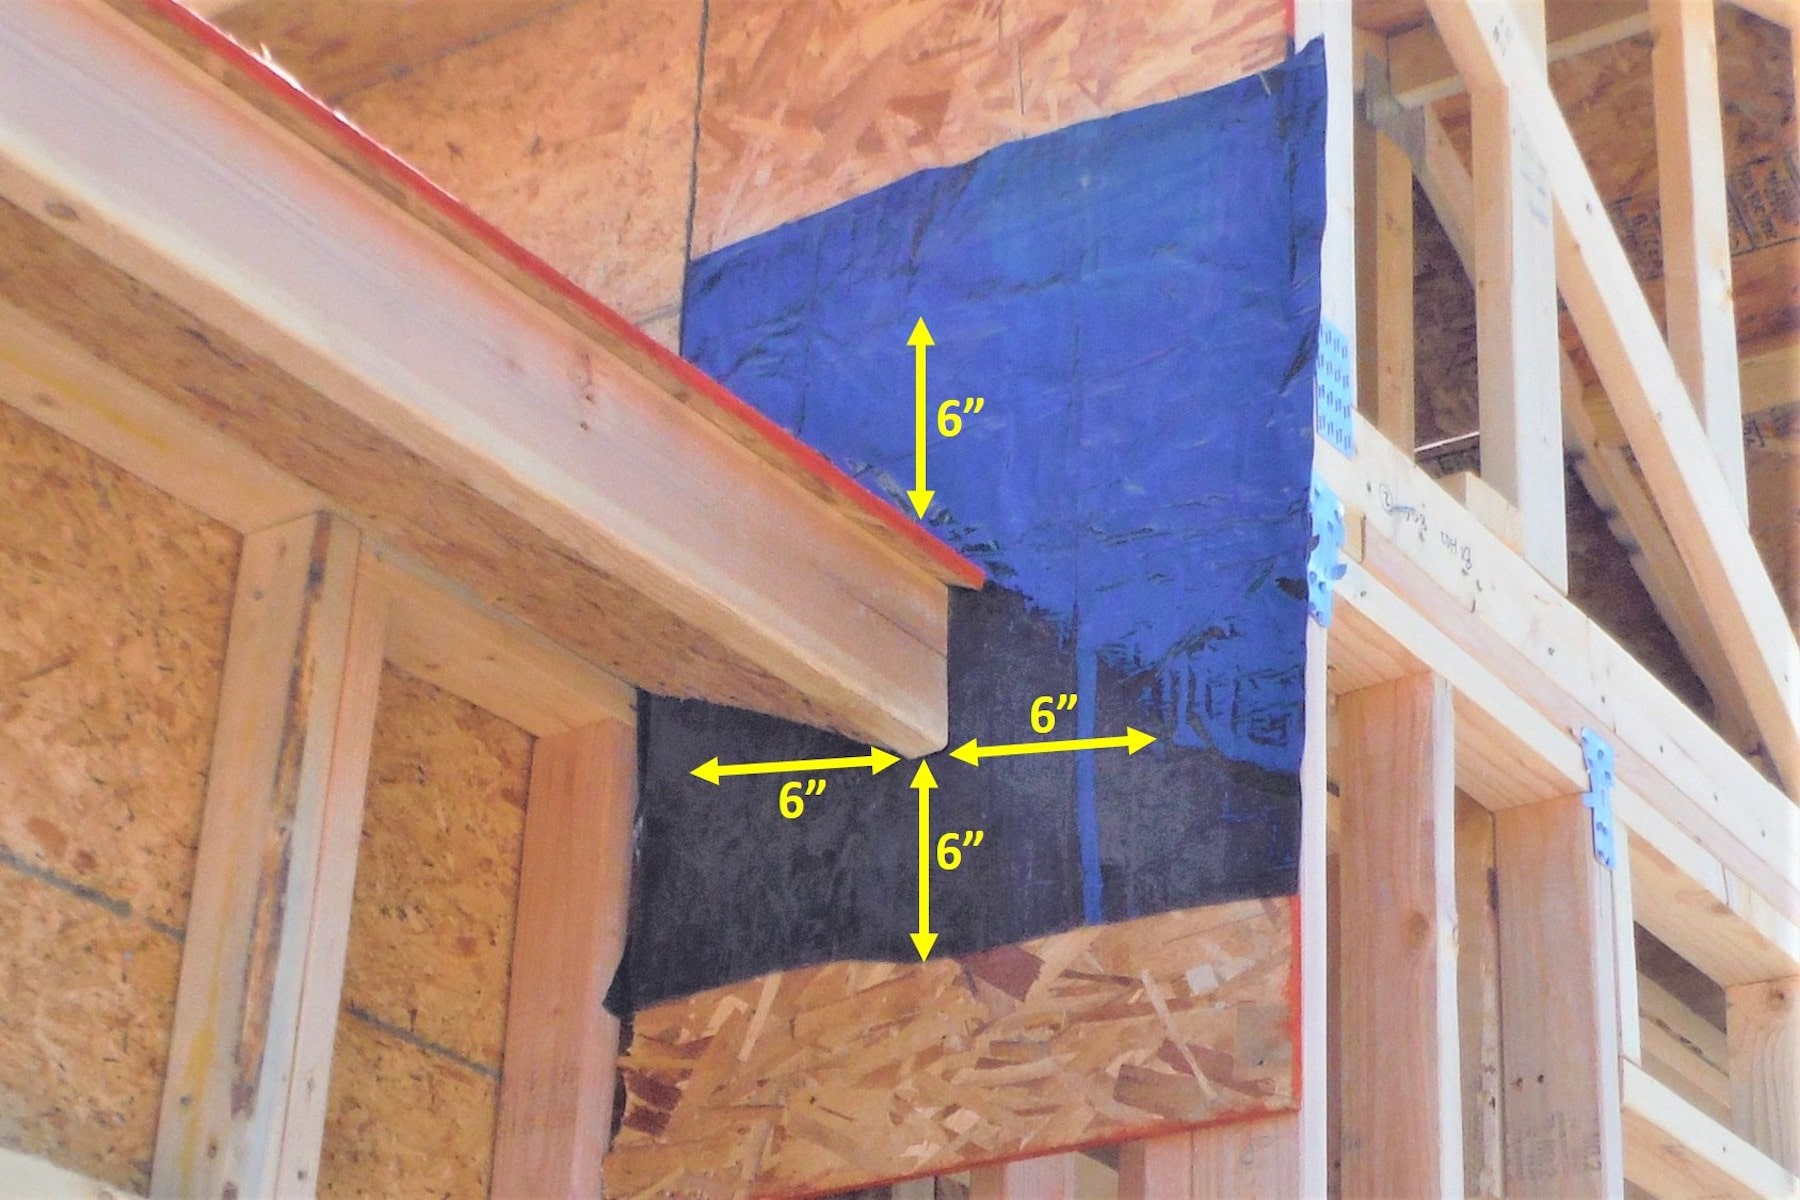 For proper fascia flashing, use waterproofing membrane where the fascia and wall meet